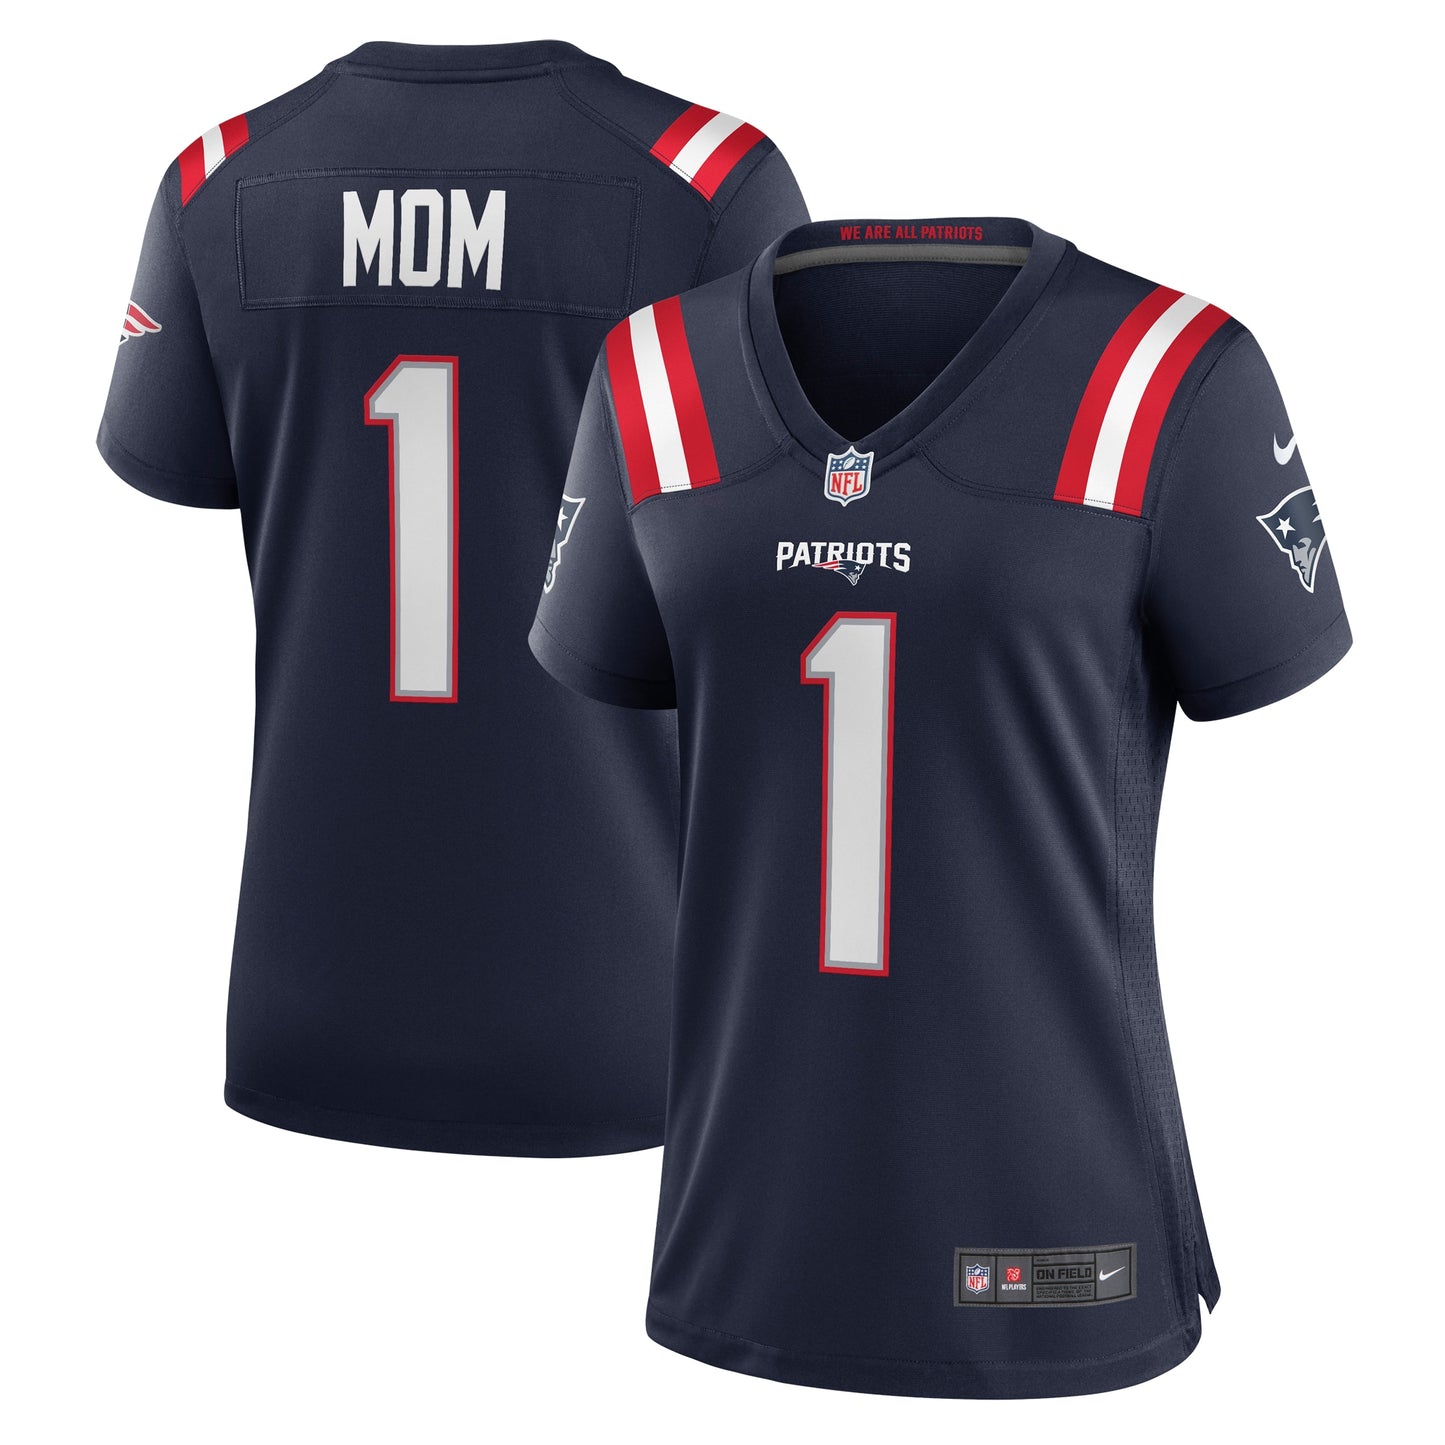 Number 1 Mom New England Patriots Nike Women's Game Jersey - Navy